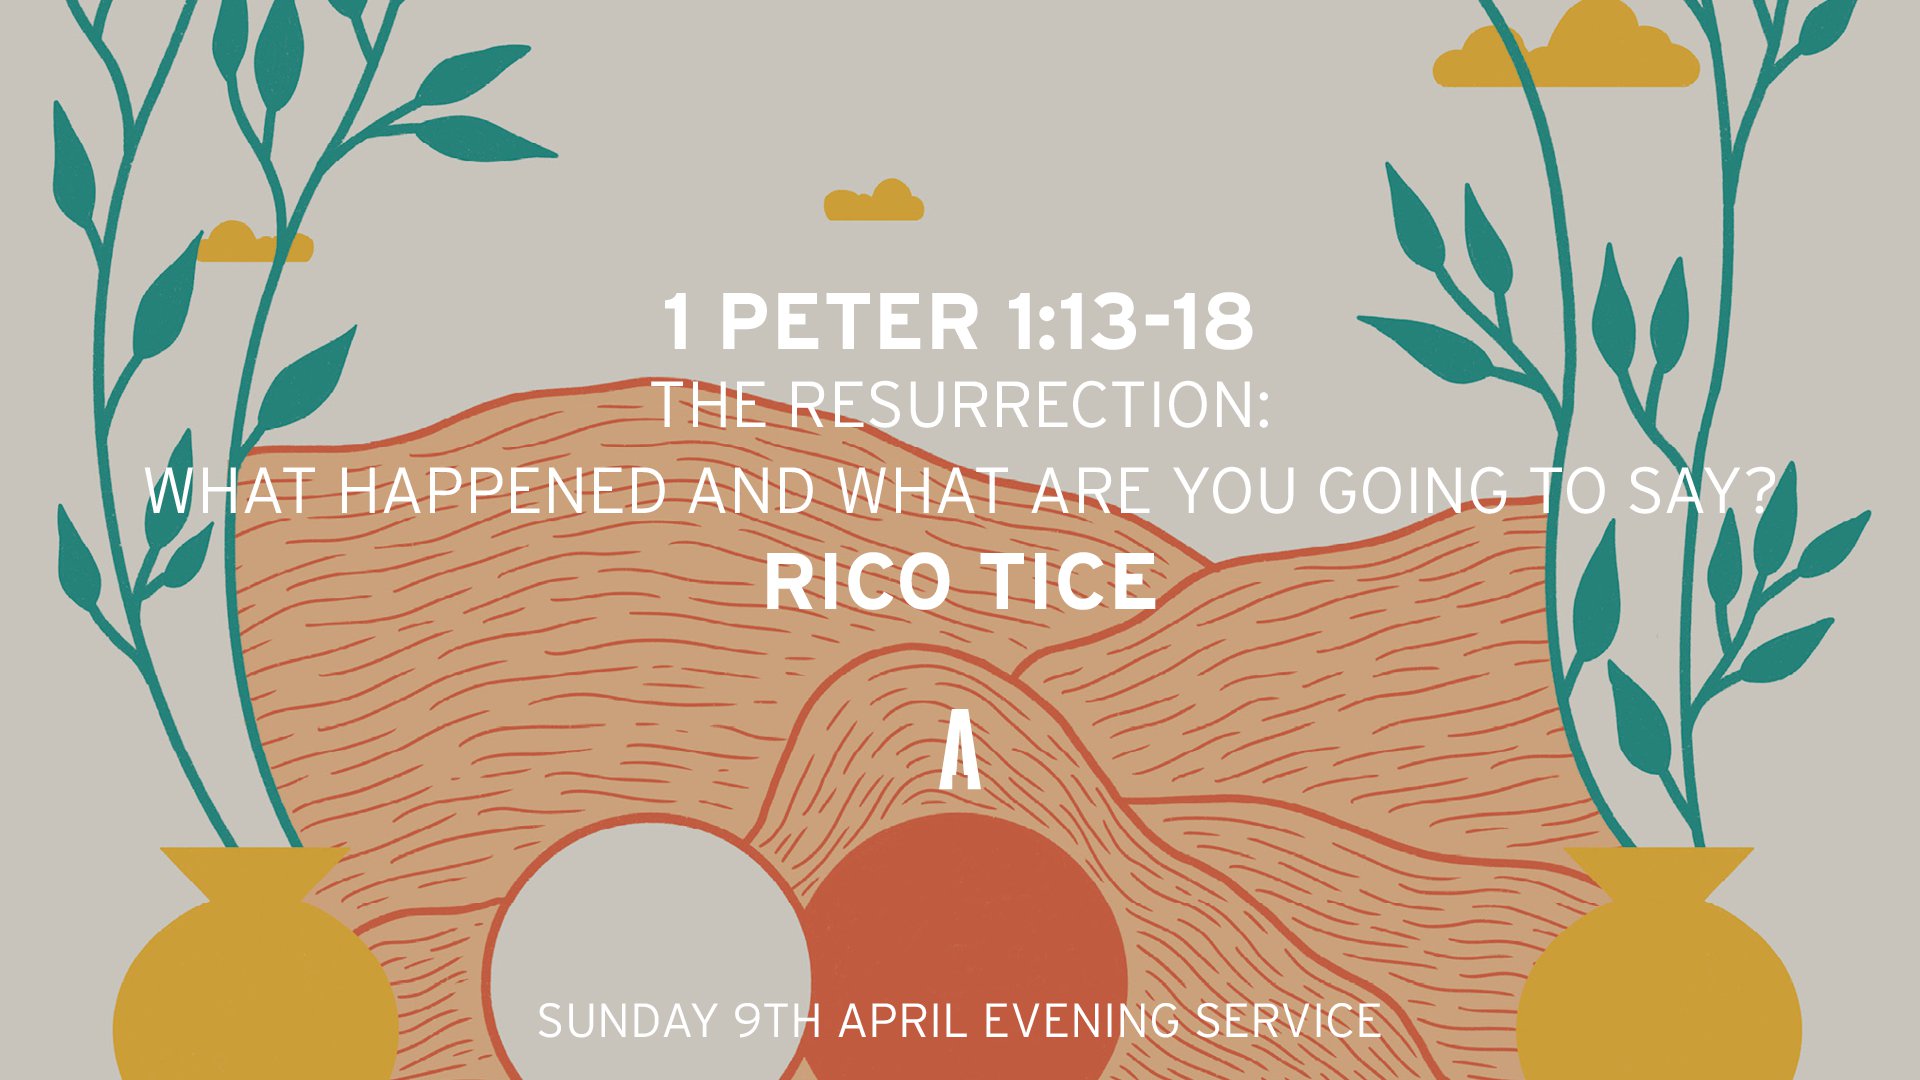 The Resurrection: What happened and what are you going to say?